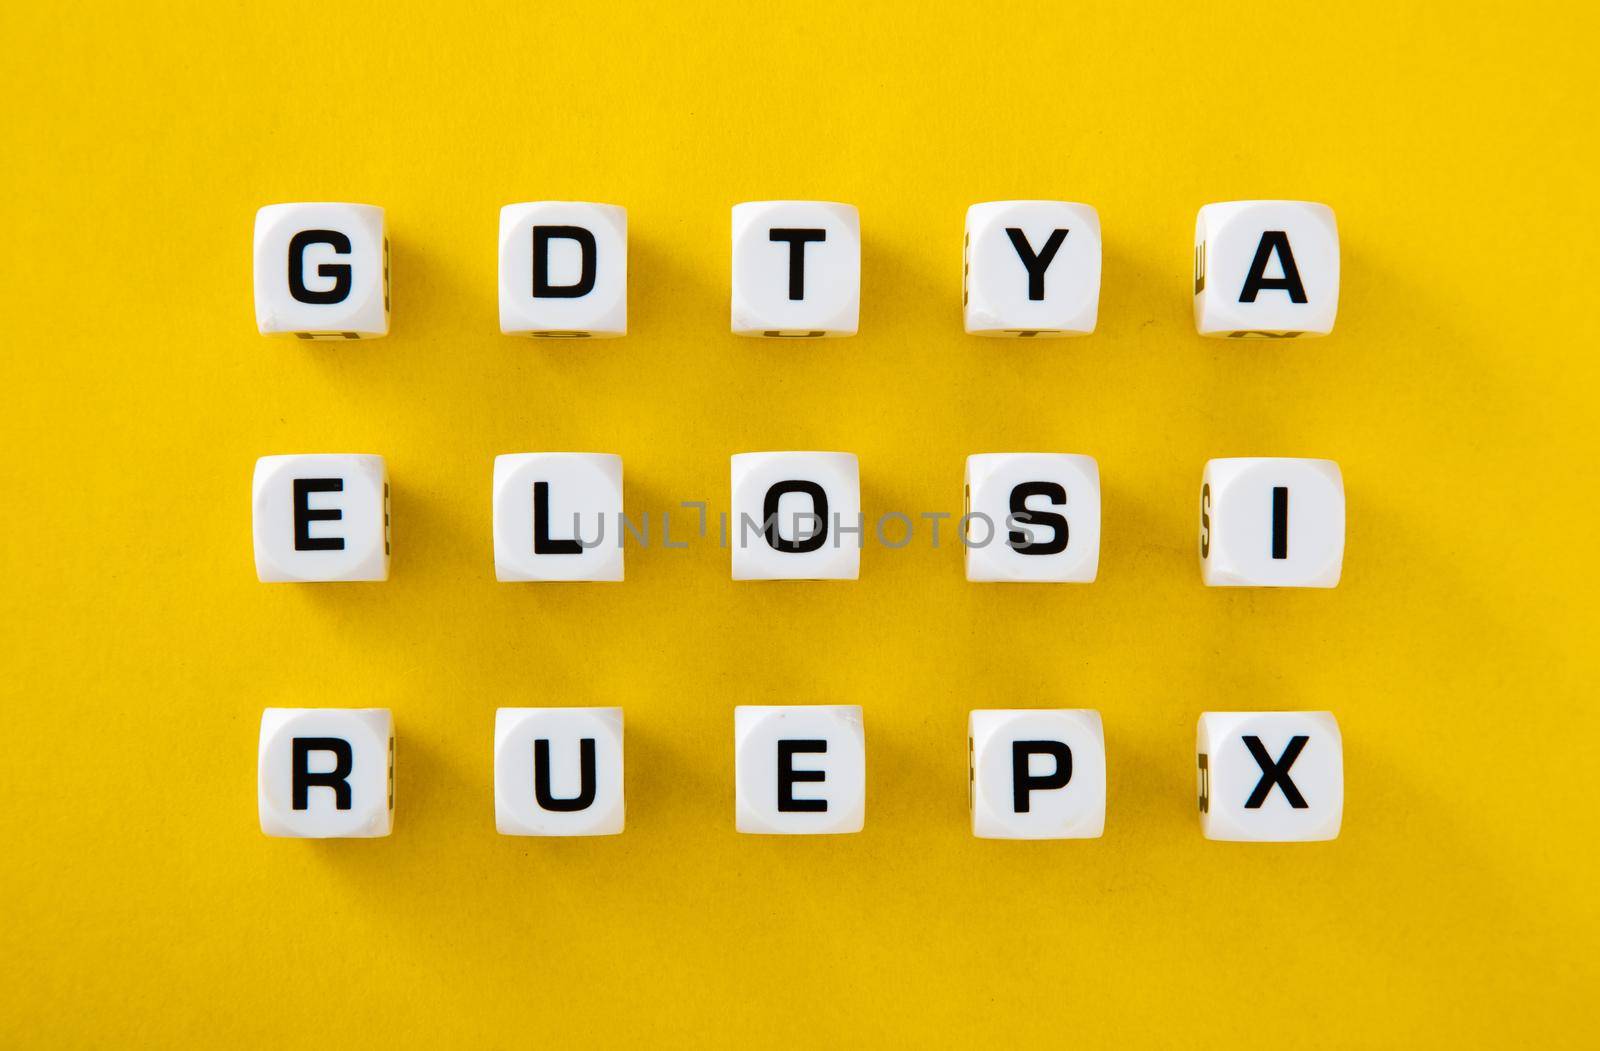 White cubes with letters scattered randomly on a yellow background